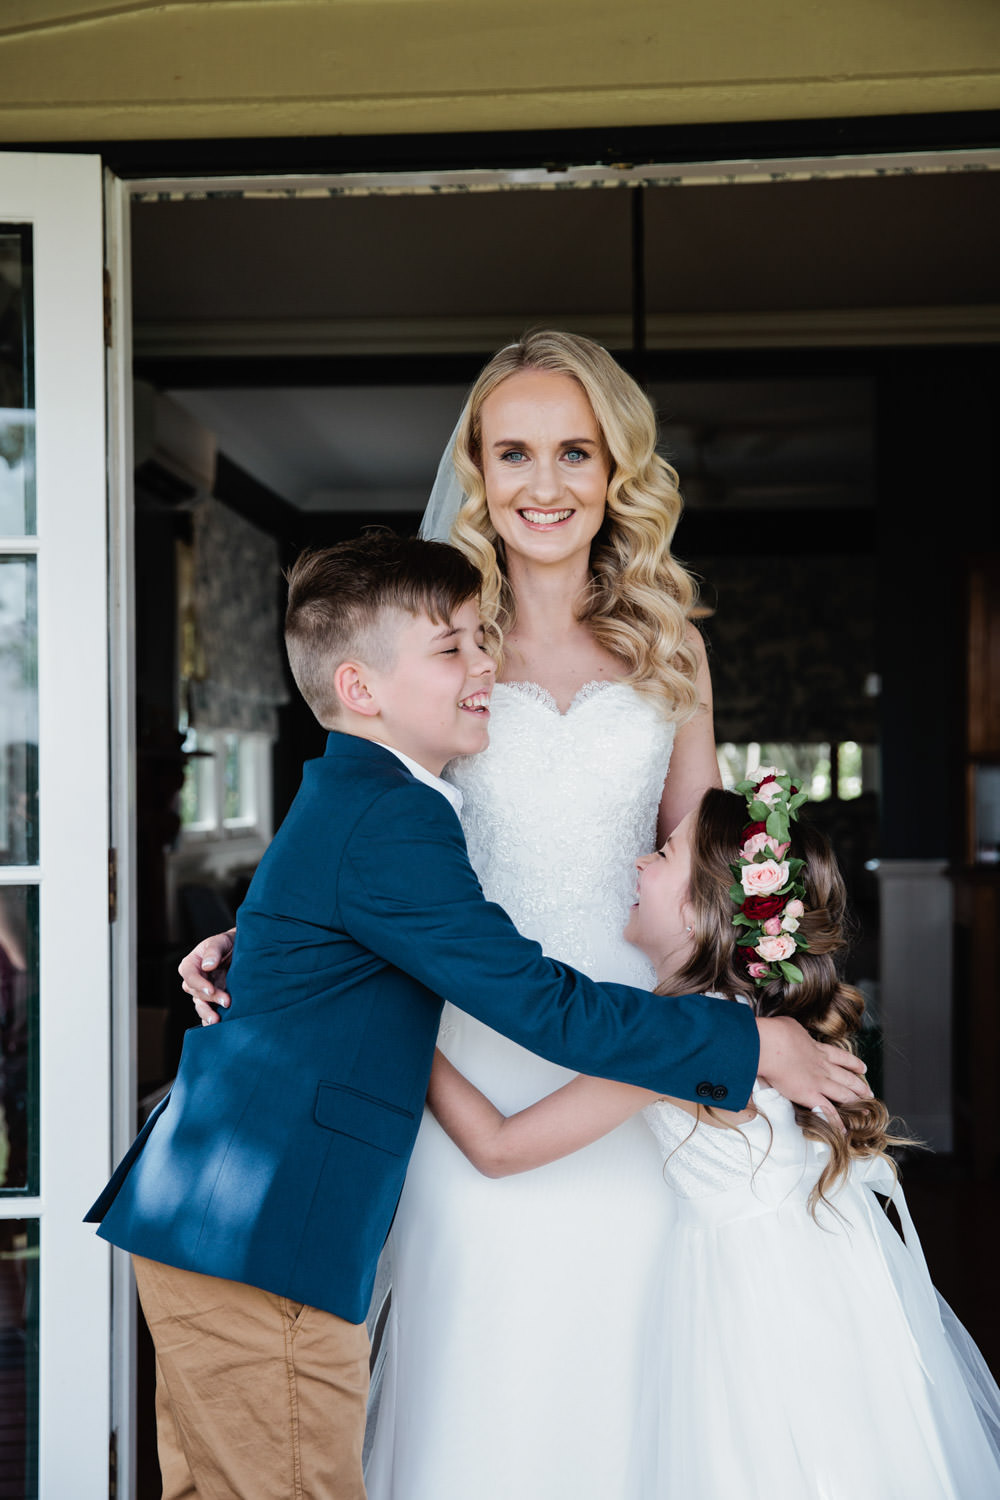 natural, fun, romantic-wedding-photography at Spicers-hiddenvale-QuinceandMulberryStudios